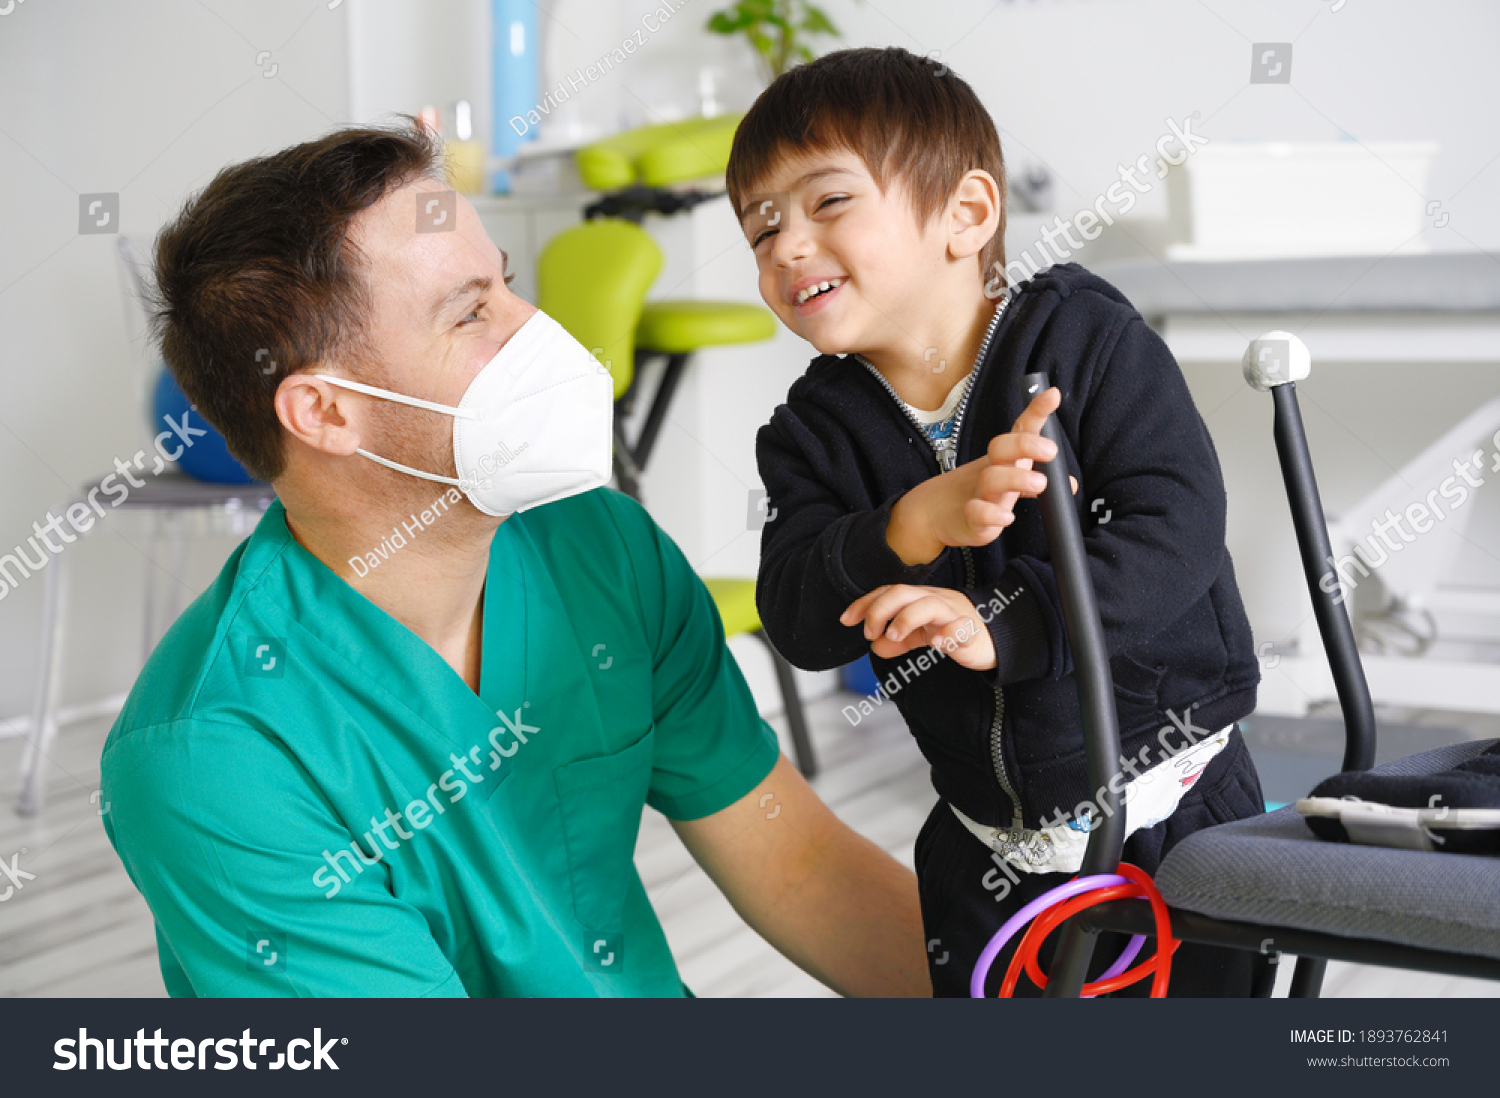 Child with cerebral palsy on physiotherapy in a children therapy center. Boy with disability doing exercises with physiotherapists in rehabitation centre. High quality photo. #1893762841